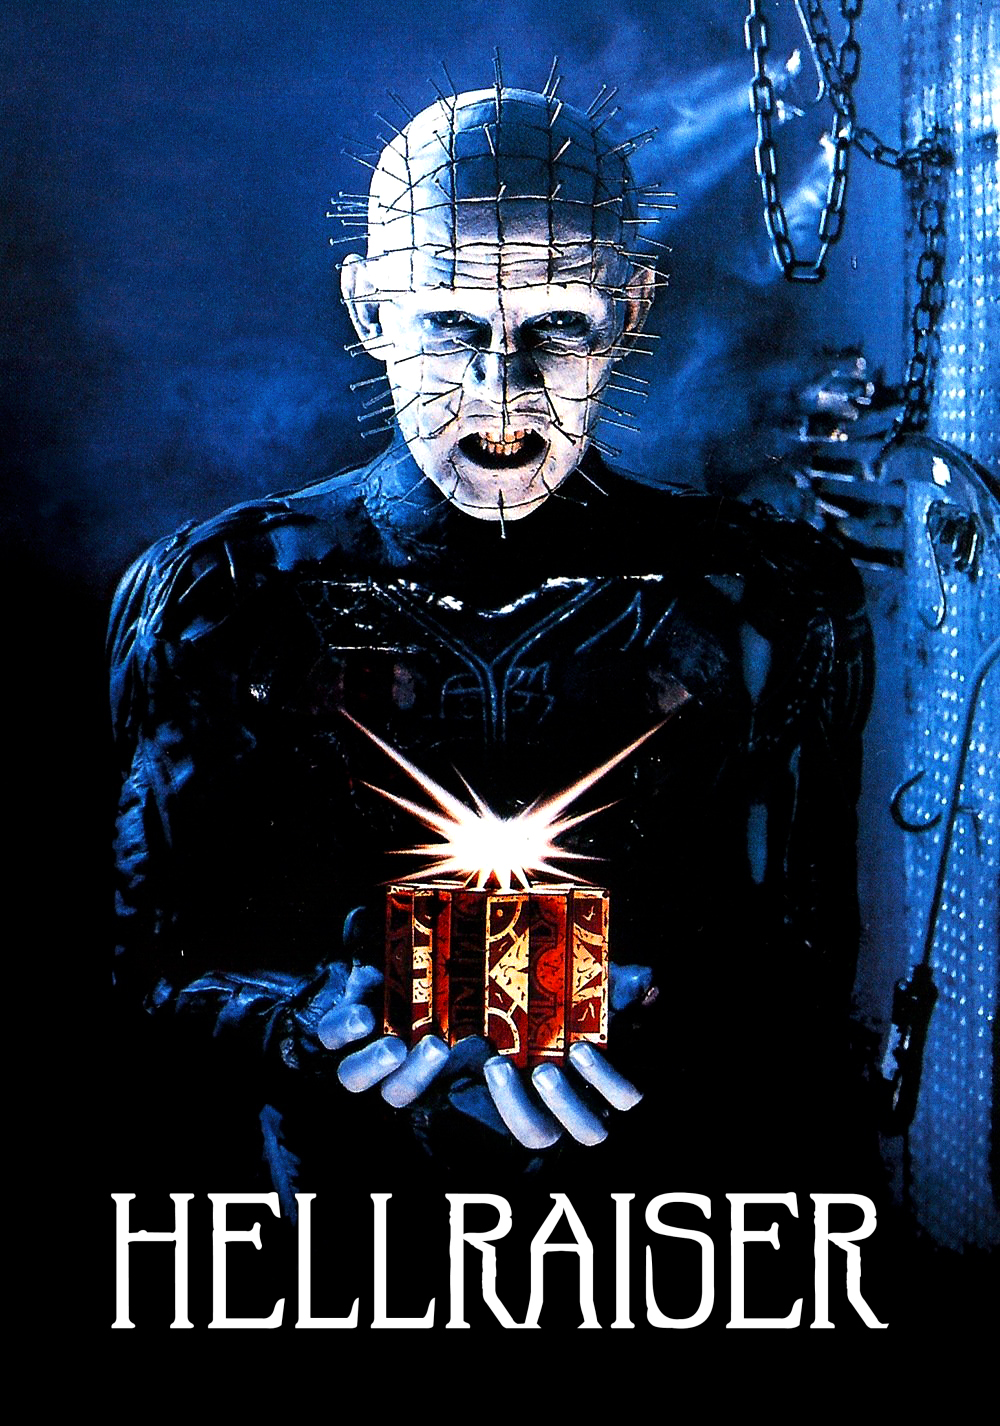 Hellraiser (2022) trailer has such sights to show you